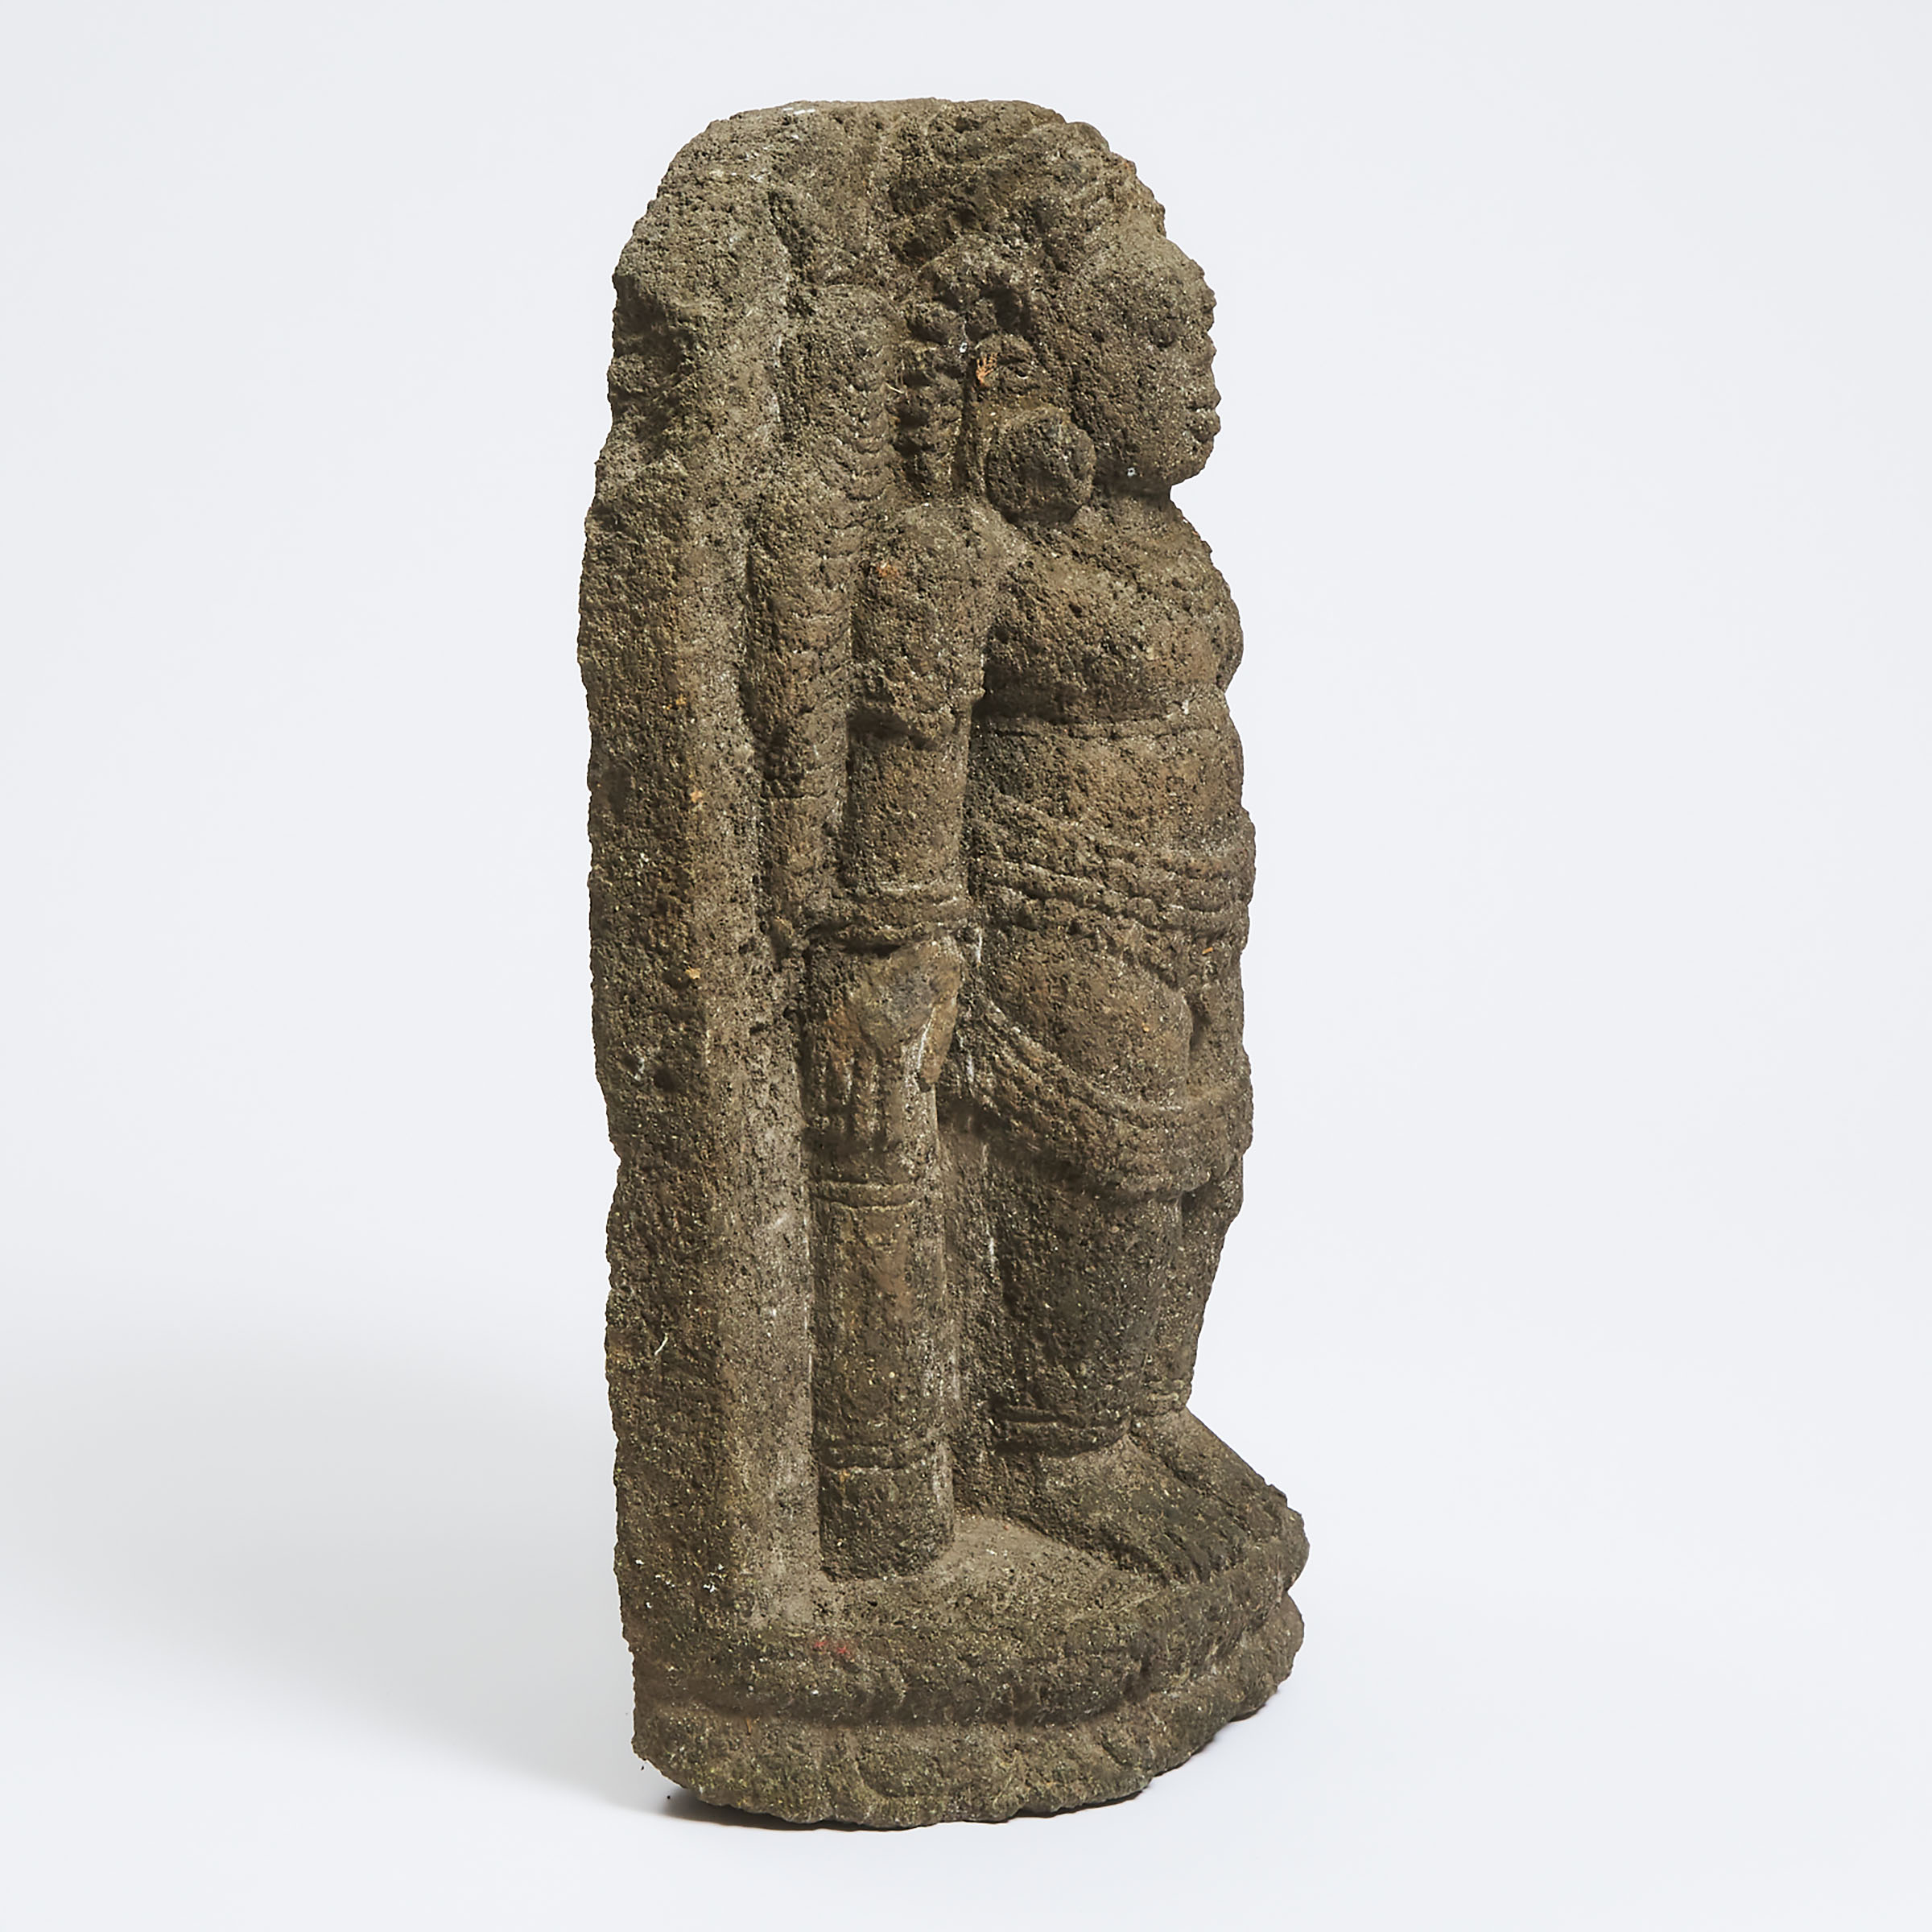 An Andesite Stele of a Standing Deity, Majapahit Empire, Java, 14th Century